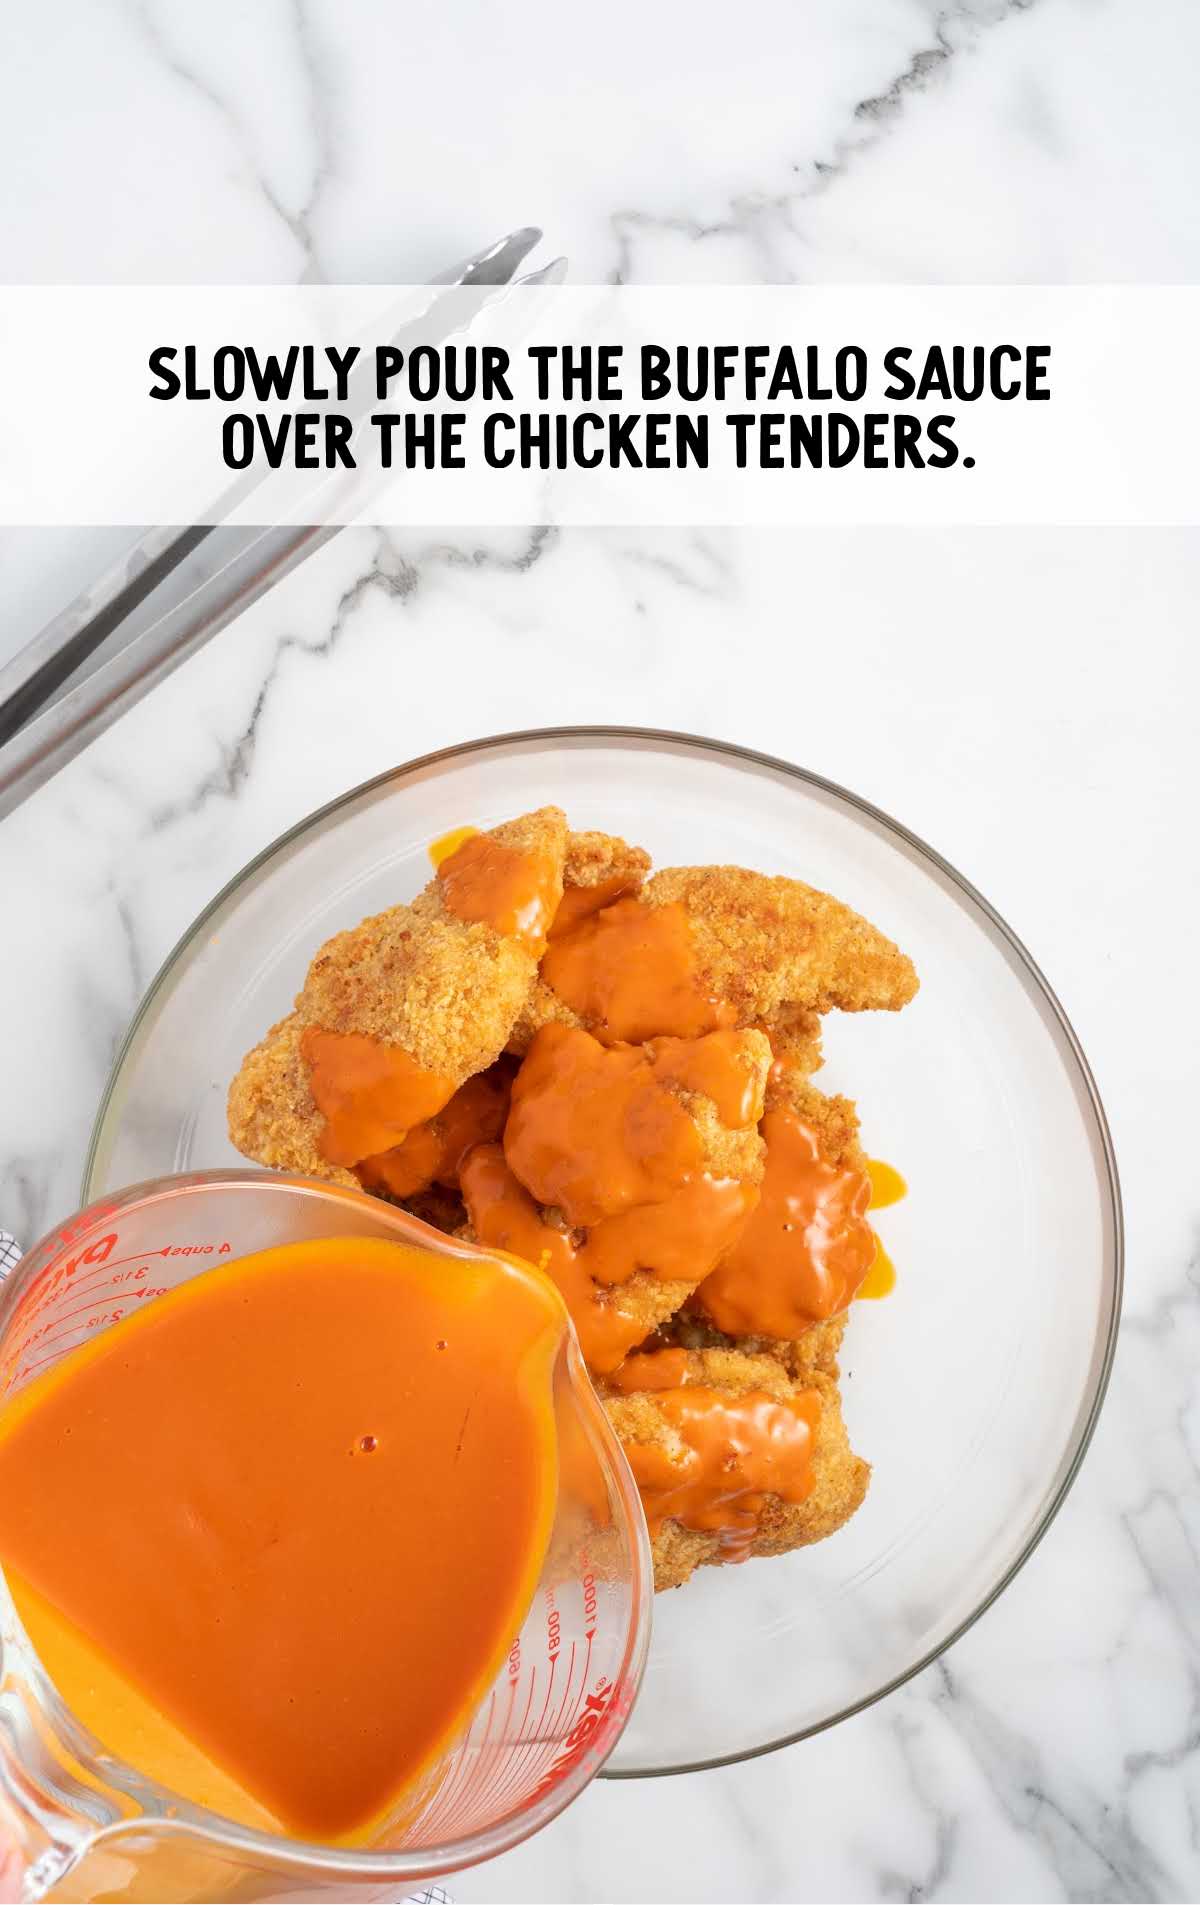 Buffalo sauce poured over the chicken tender